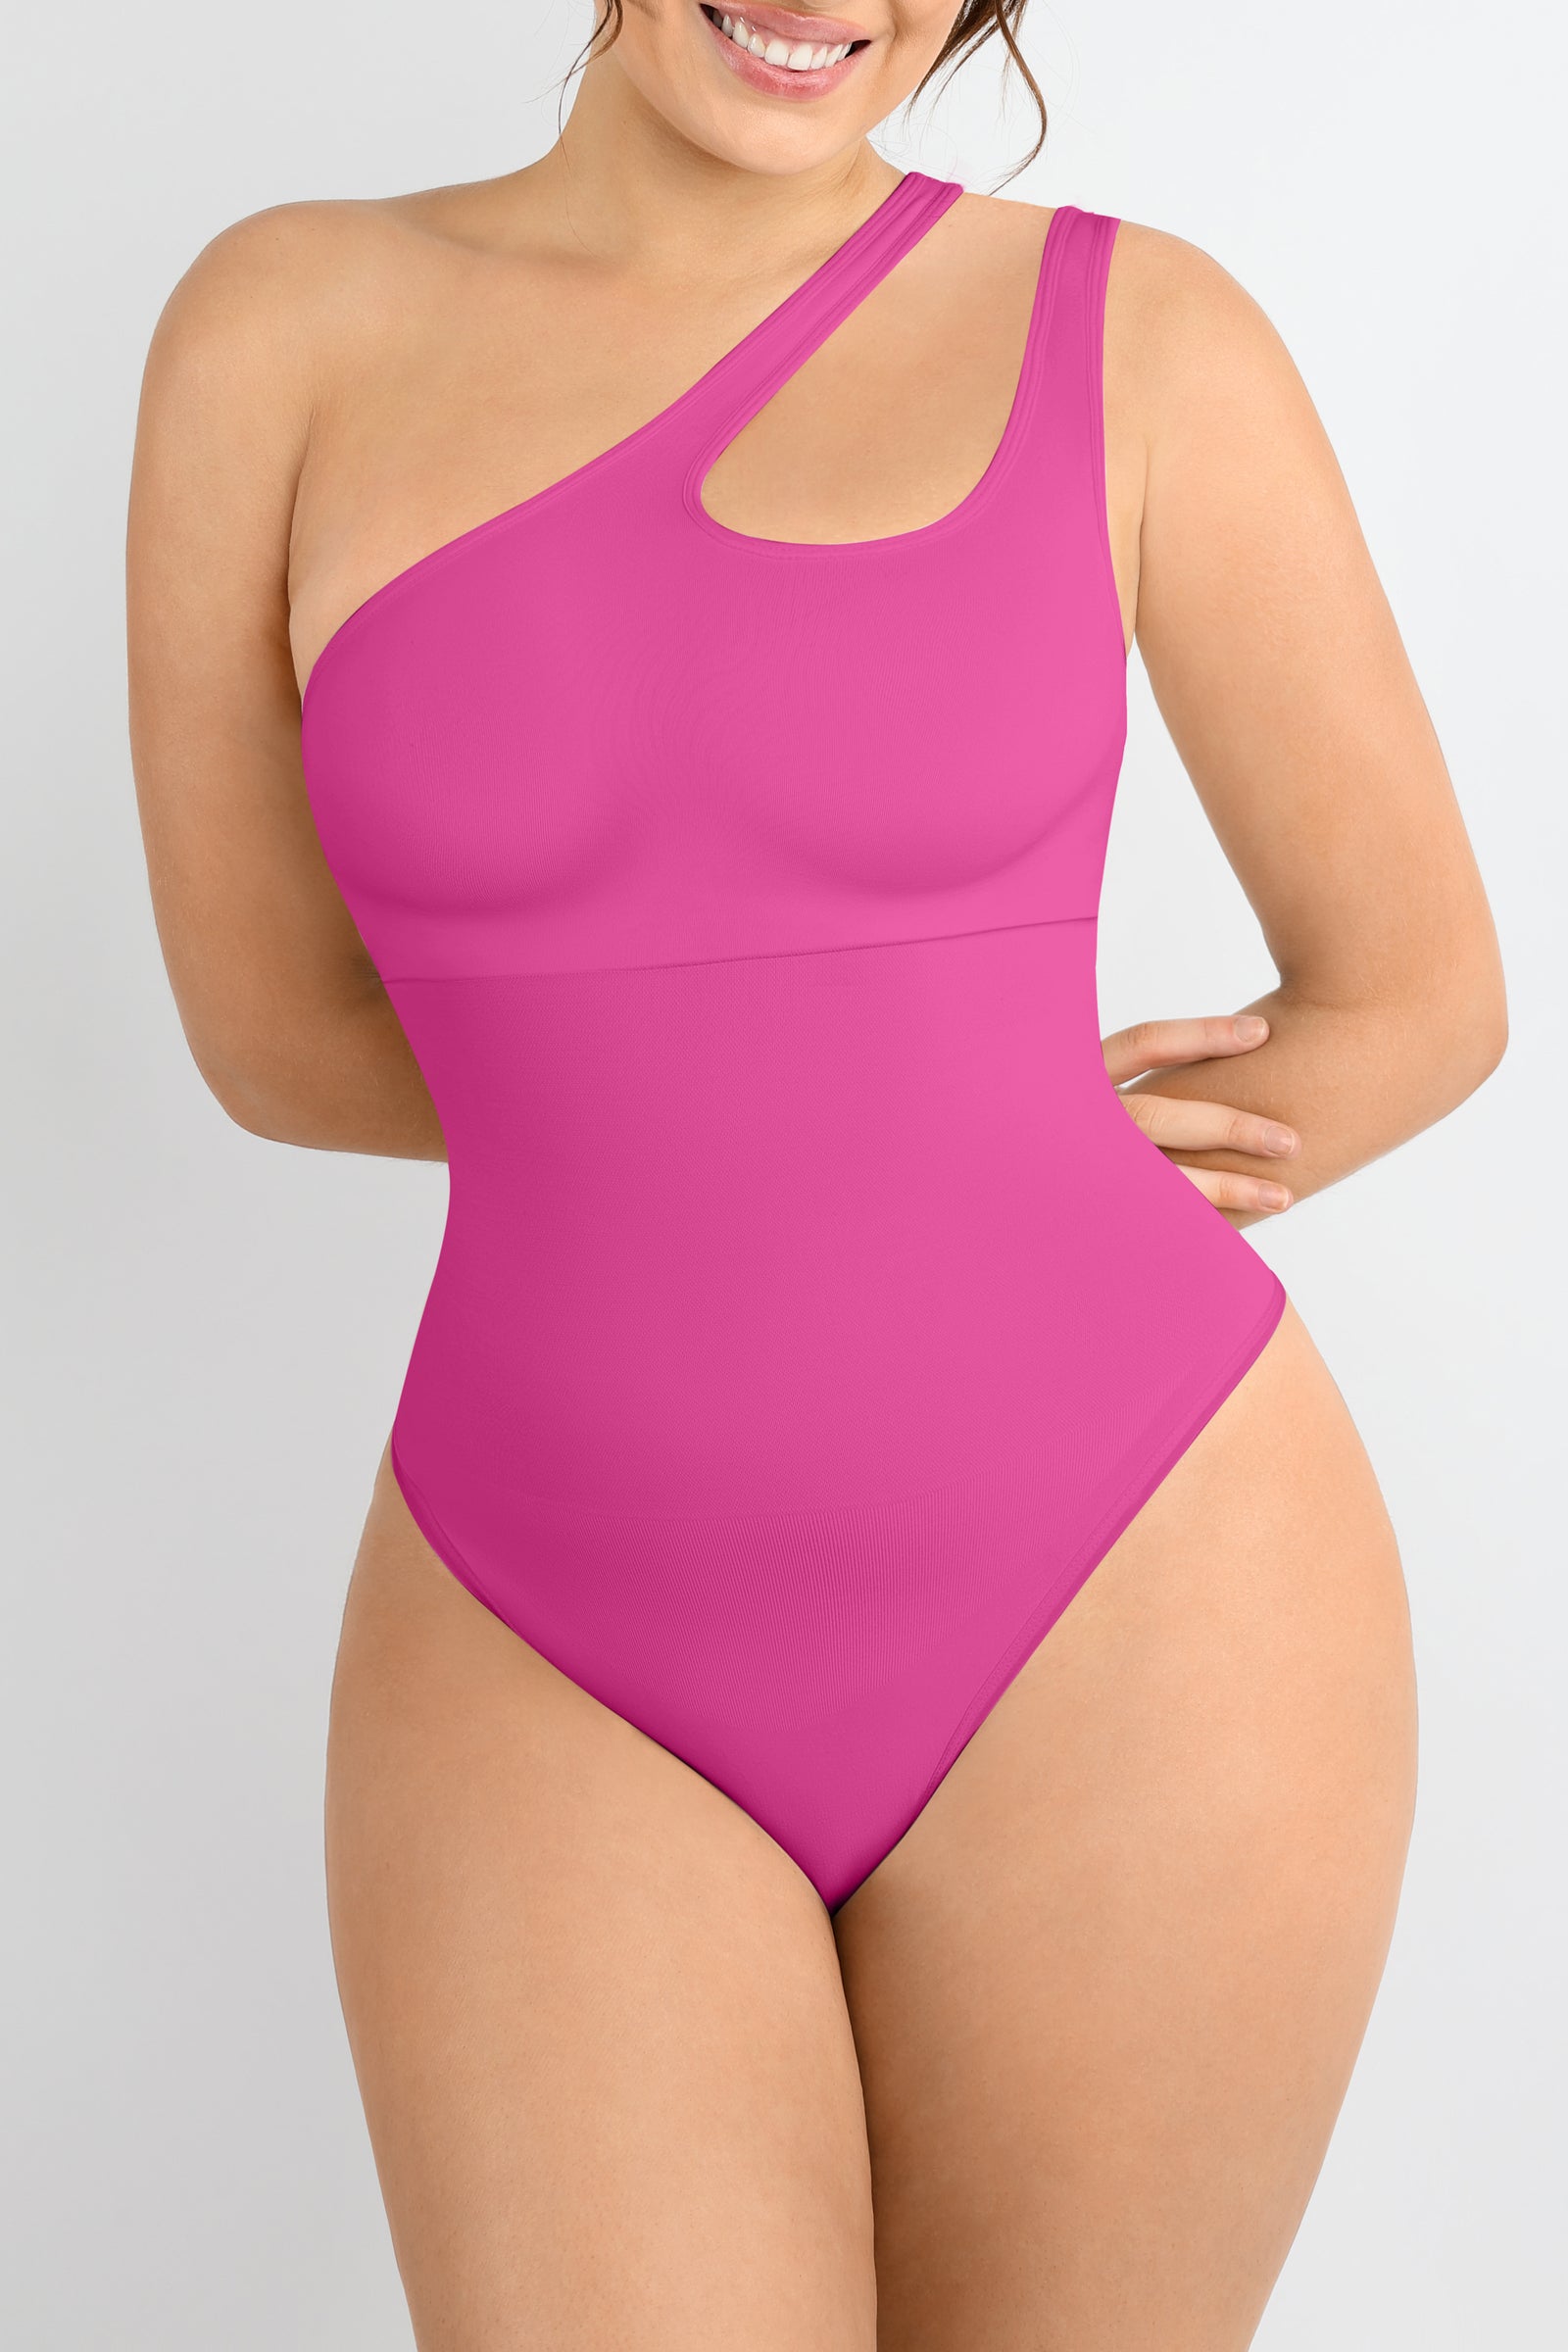 SONRYSE 085 Post Surgery Bodysuit Shapewear with Built-in Bra Postpart –  Curved By Angeliques